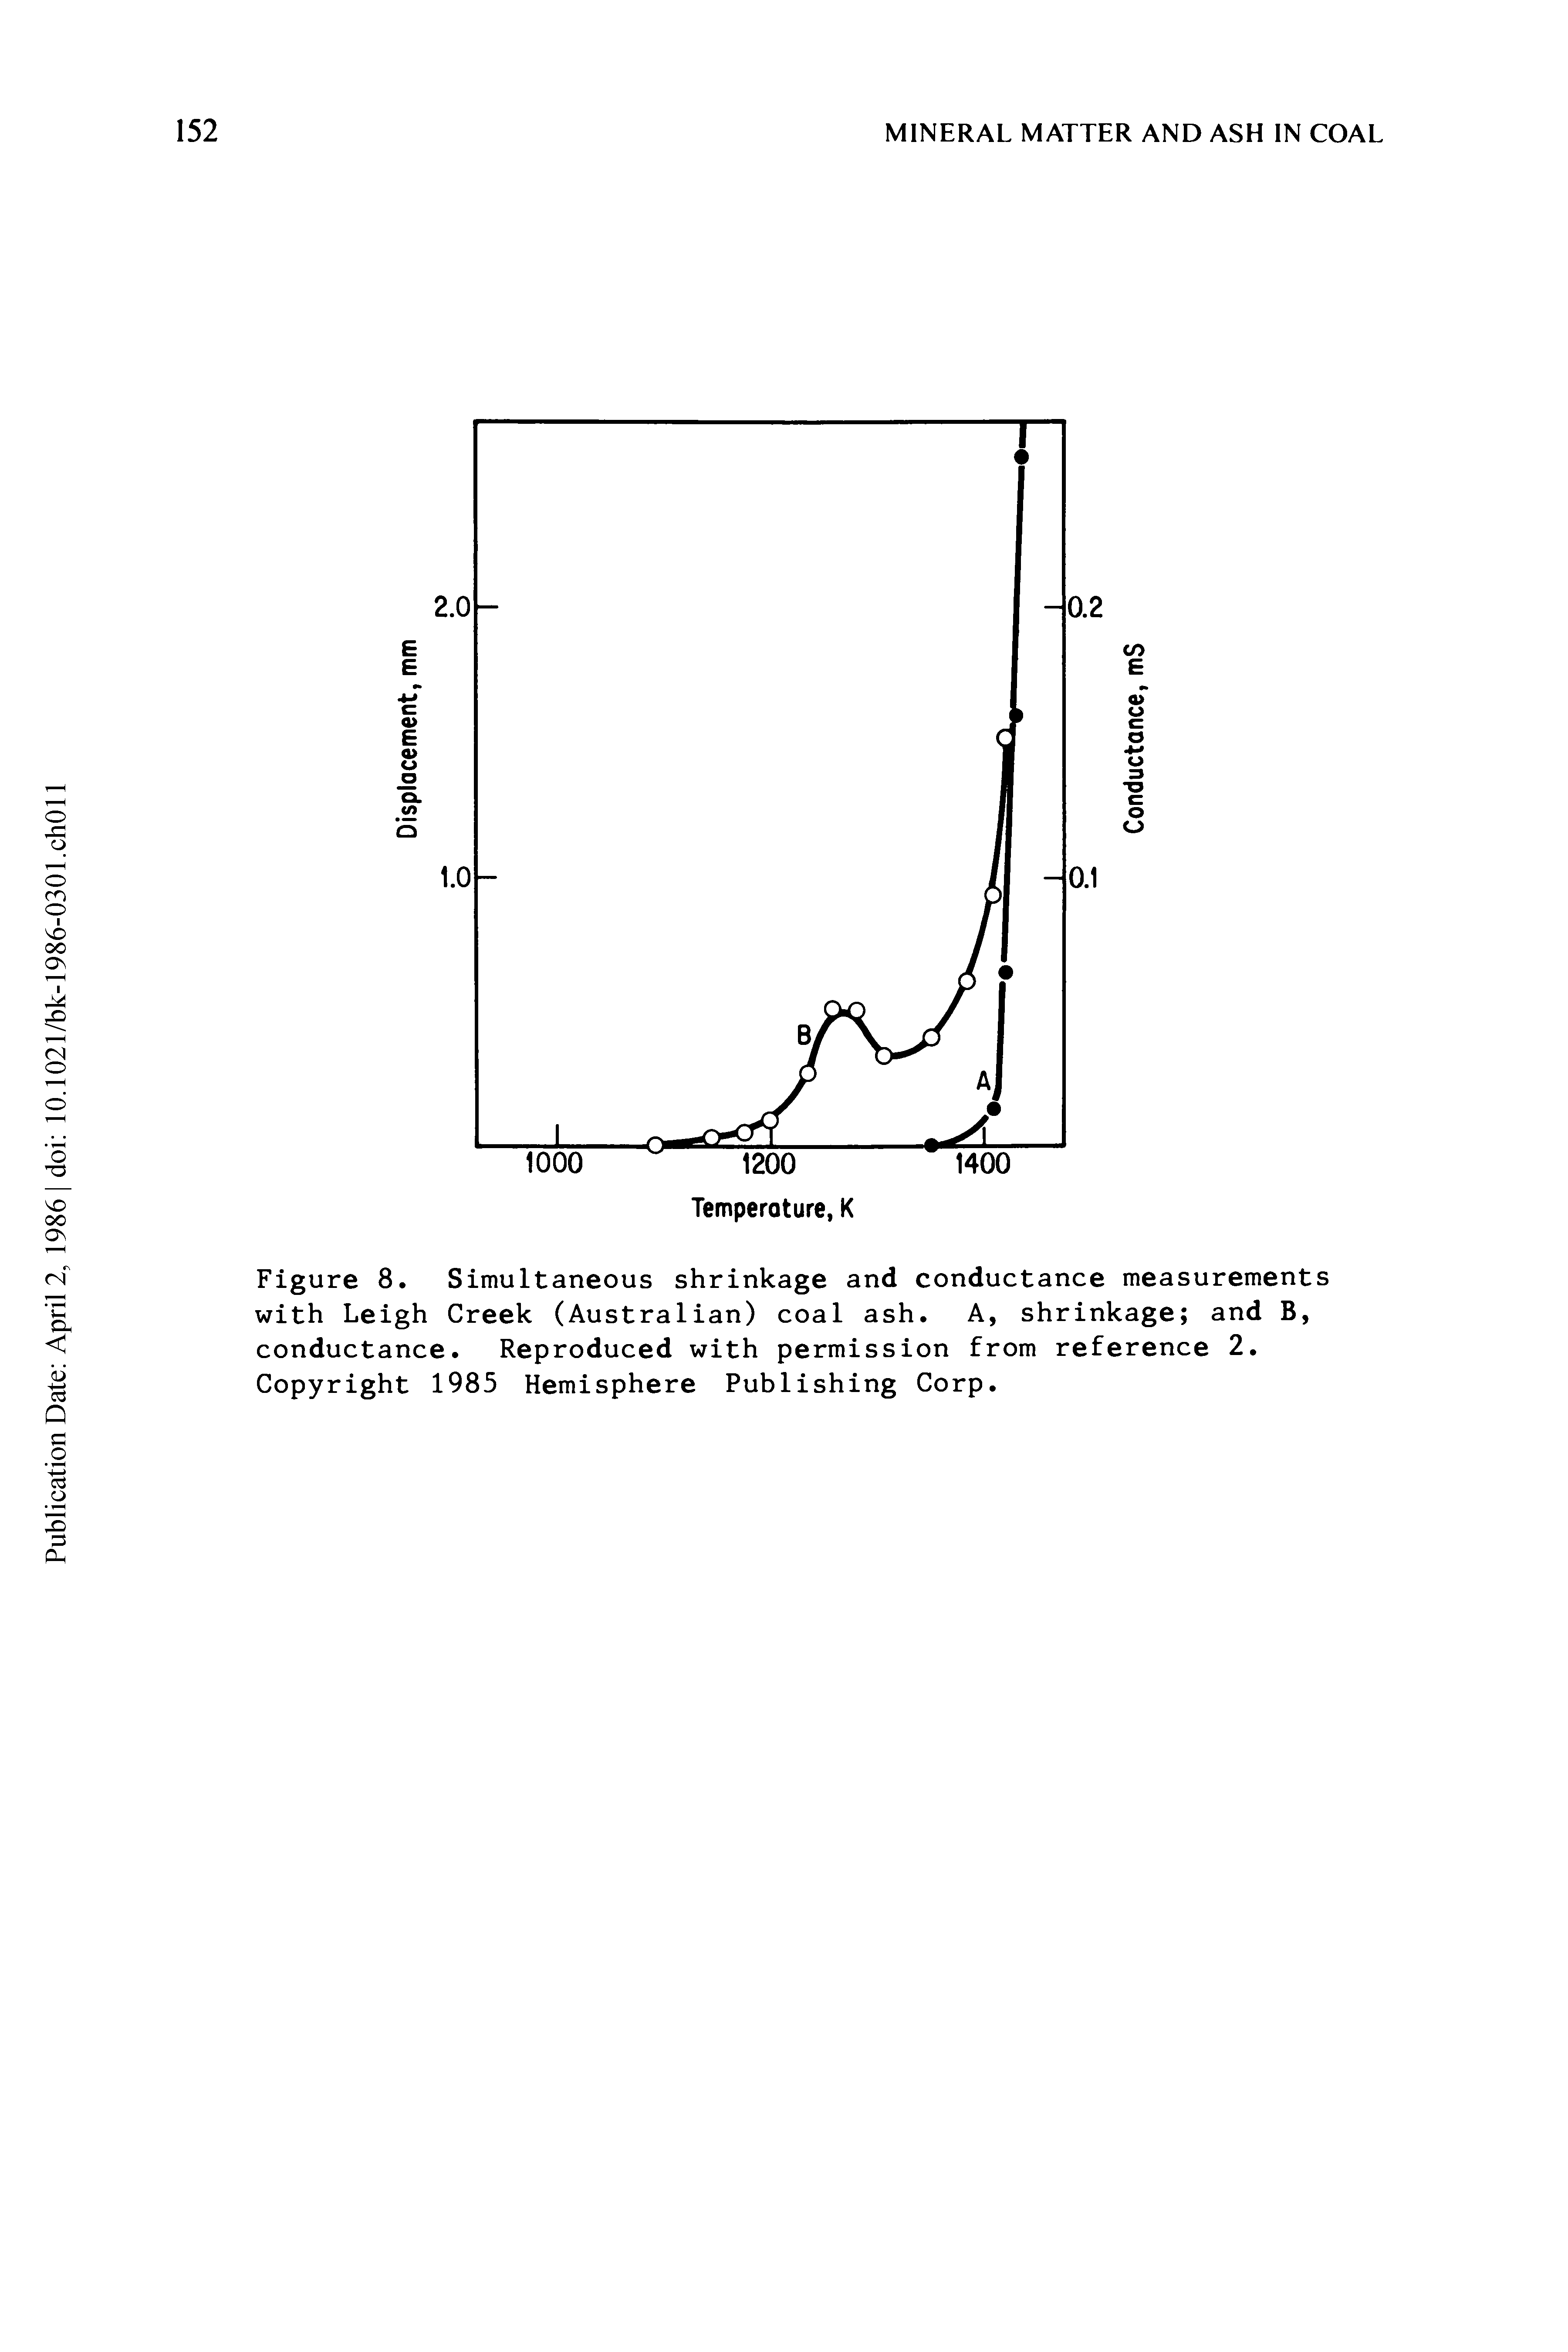 Figure 8. Simultaneous shrinkage and conductance measurements with Leigh Creek (Australian) coal ash. A, shrinkage and B, conductance. Reproduced with permission from reference 2. Copyright 1985 Hemisphere Publishing Corp.